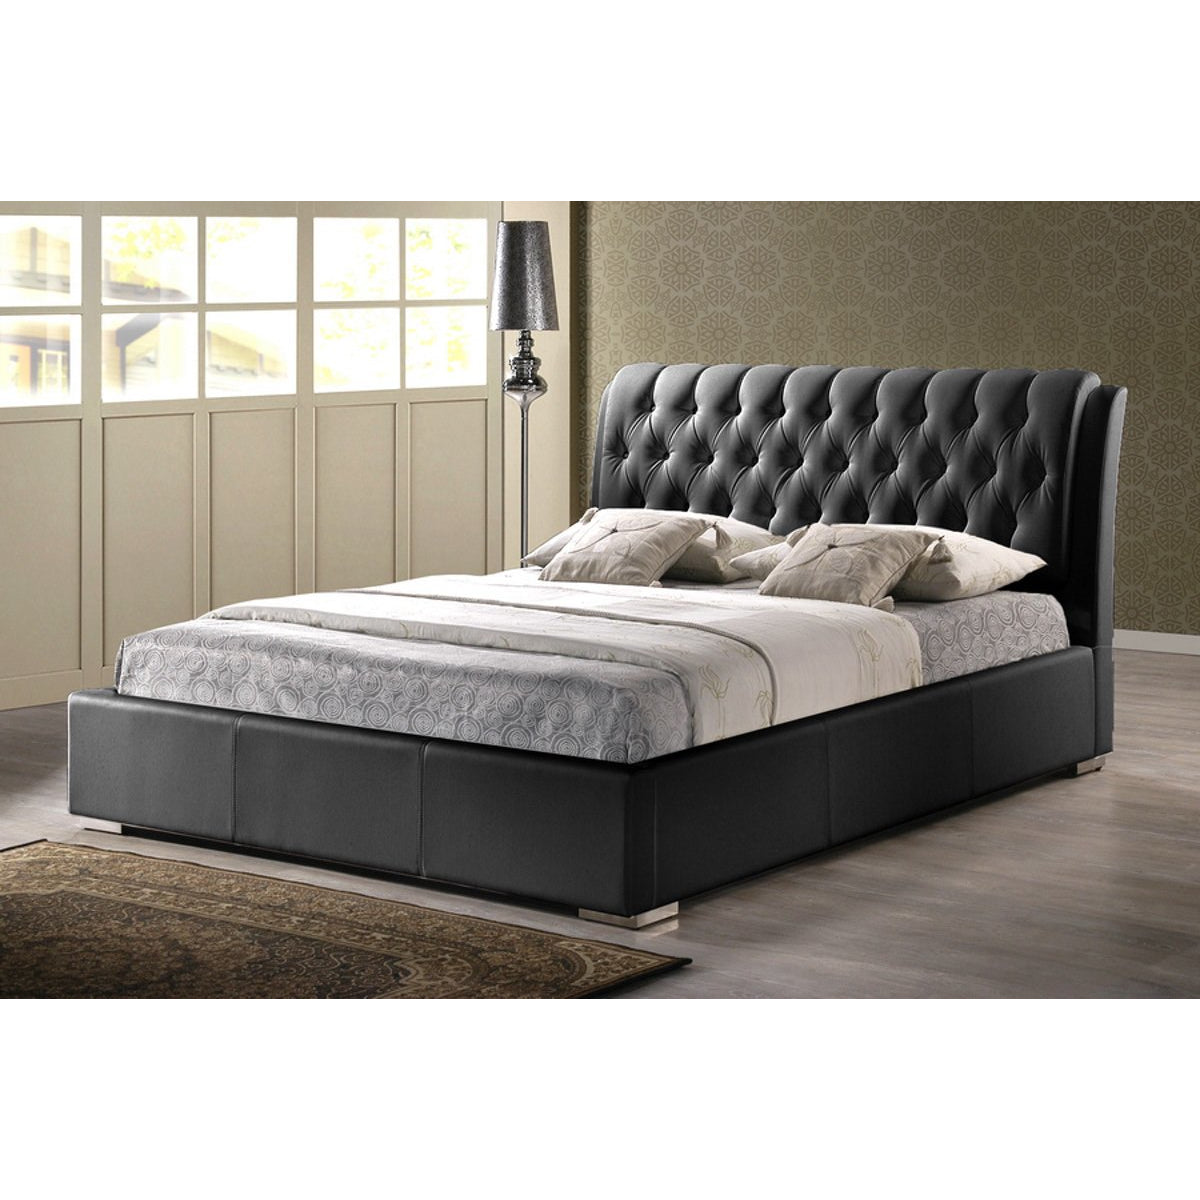 Baxton Studio Bianca Black Modern Bed with Tufted Headboard (Queen Size) Baxton Studio-beds-Minimal And Modern - 1